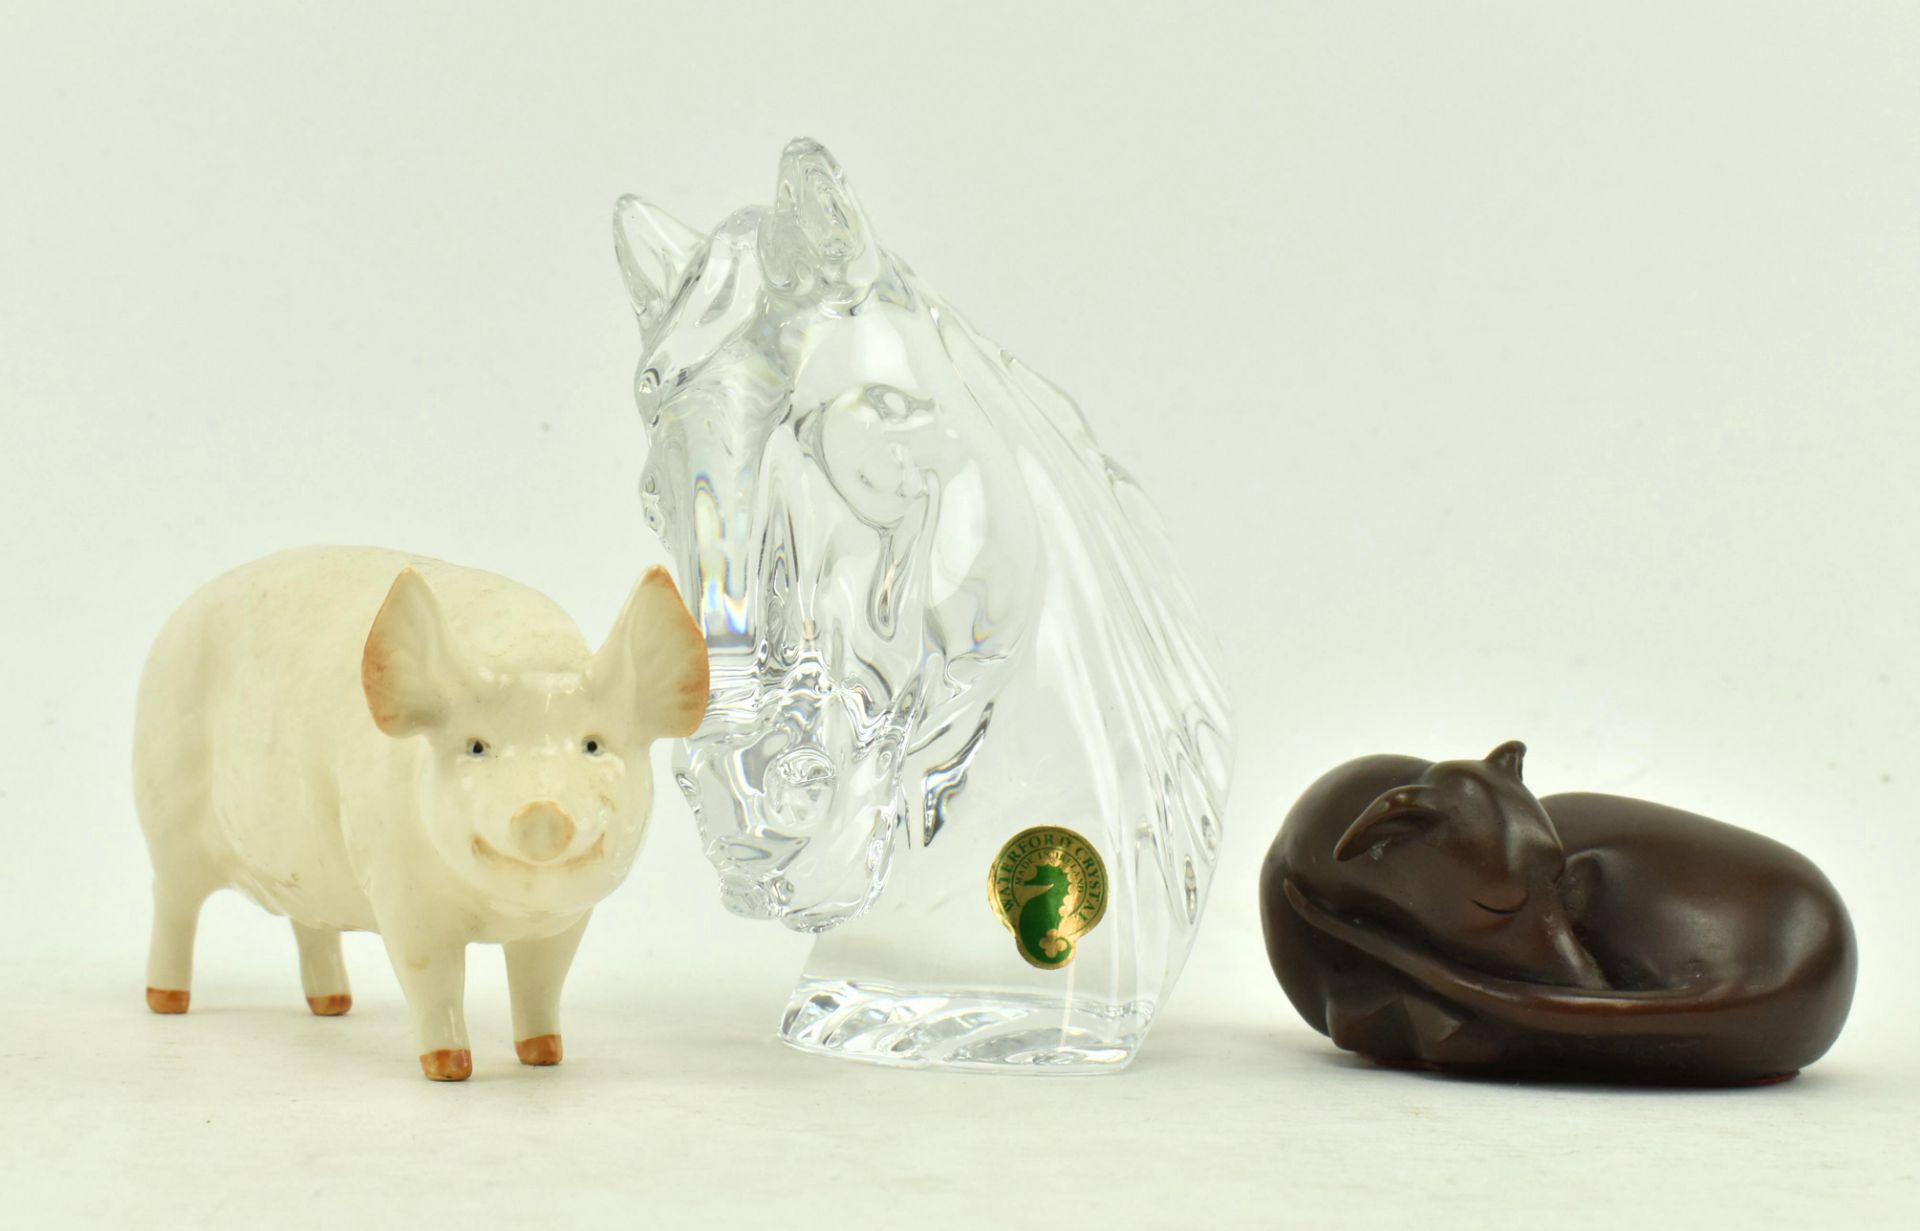 WATERFORD CRYSTAL GLASS HORSE, BESWICK WALLQUEEN & 1 OTHER